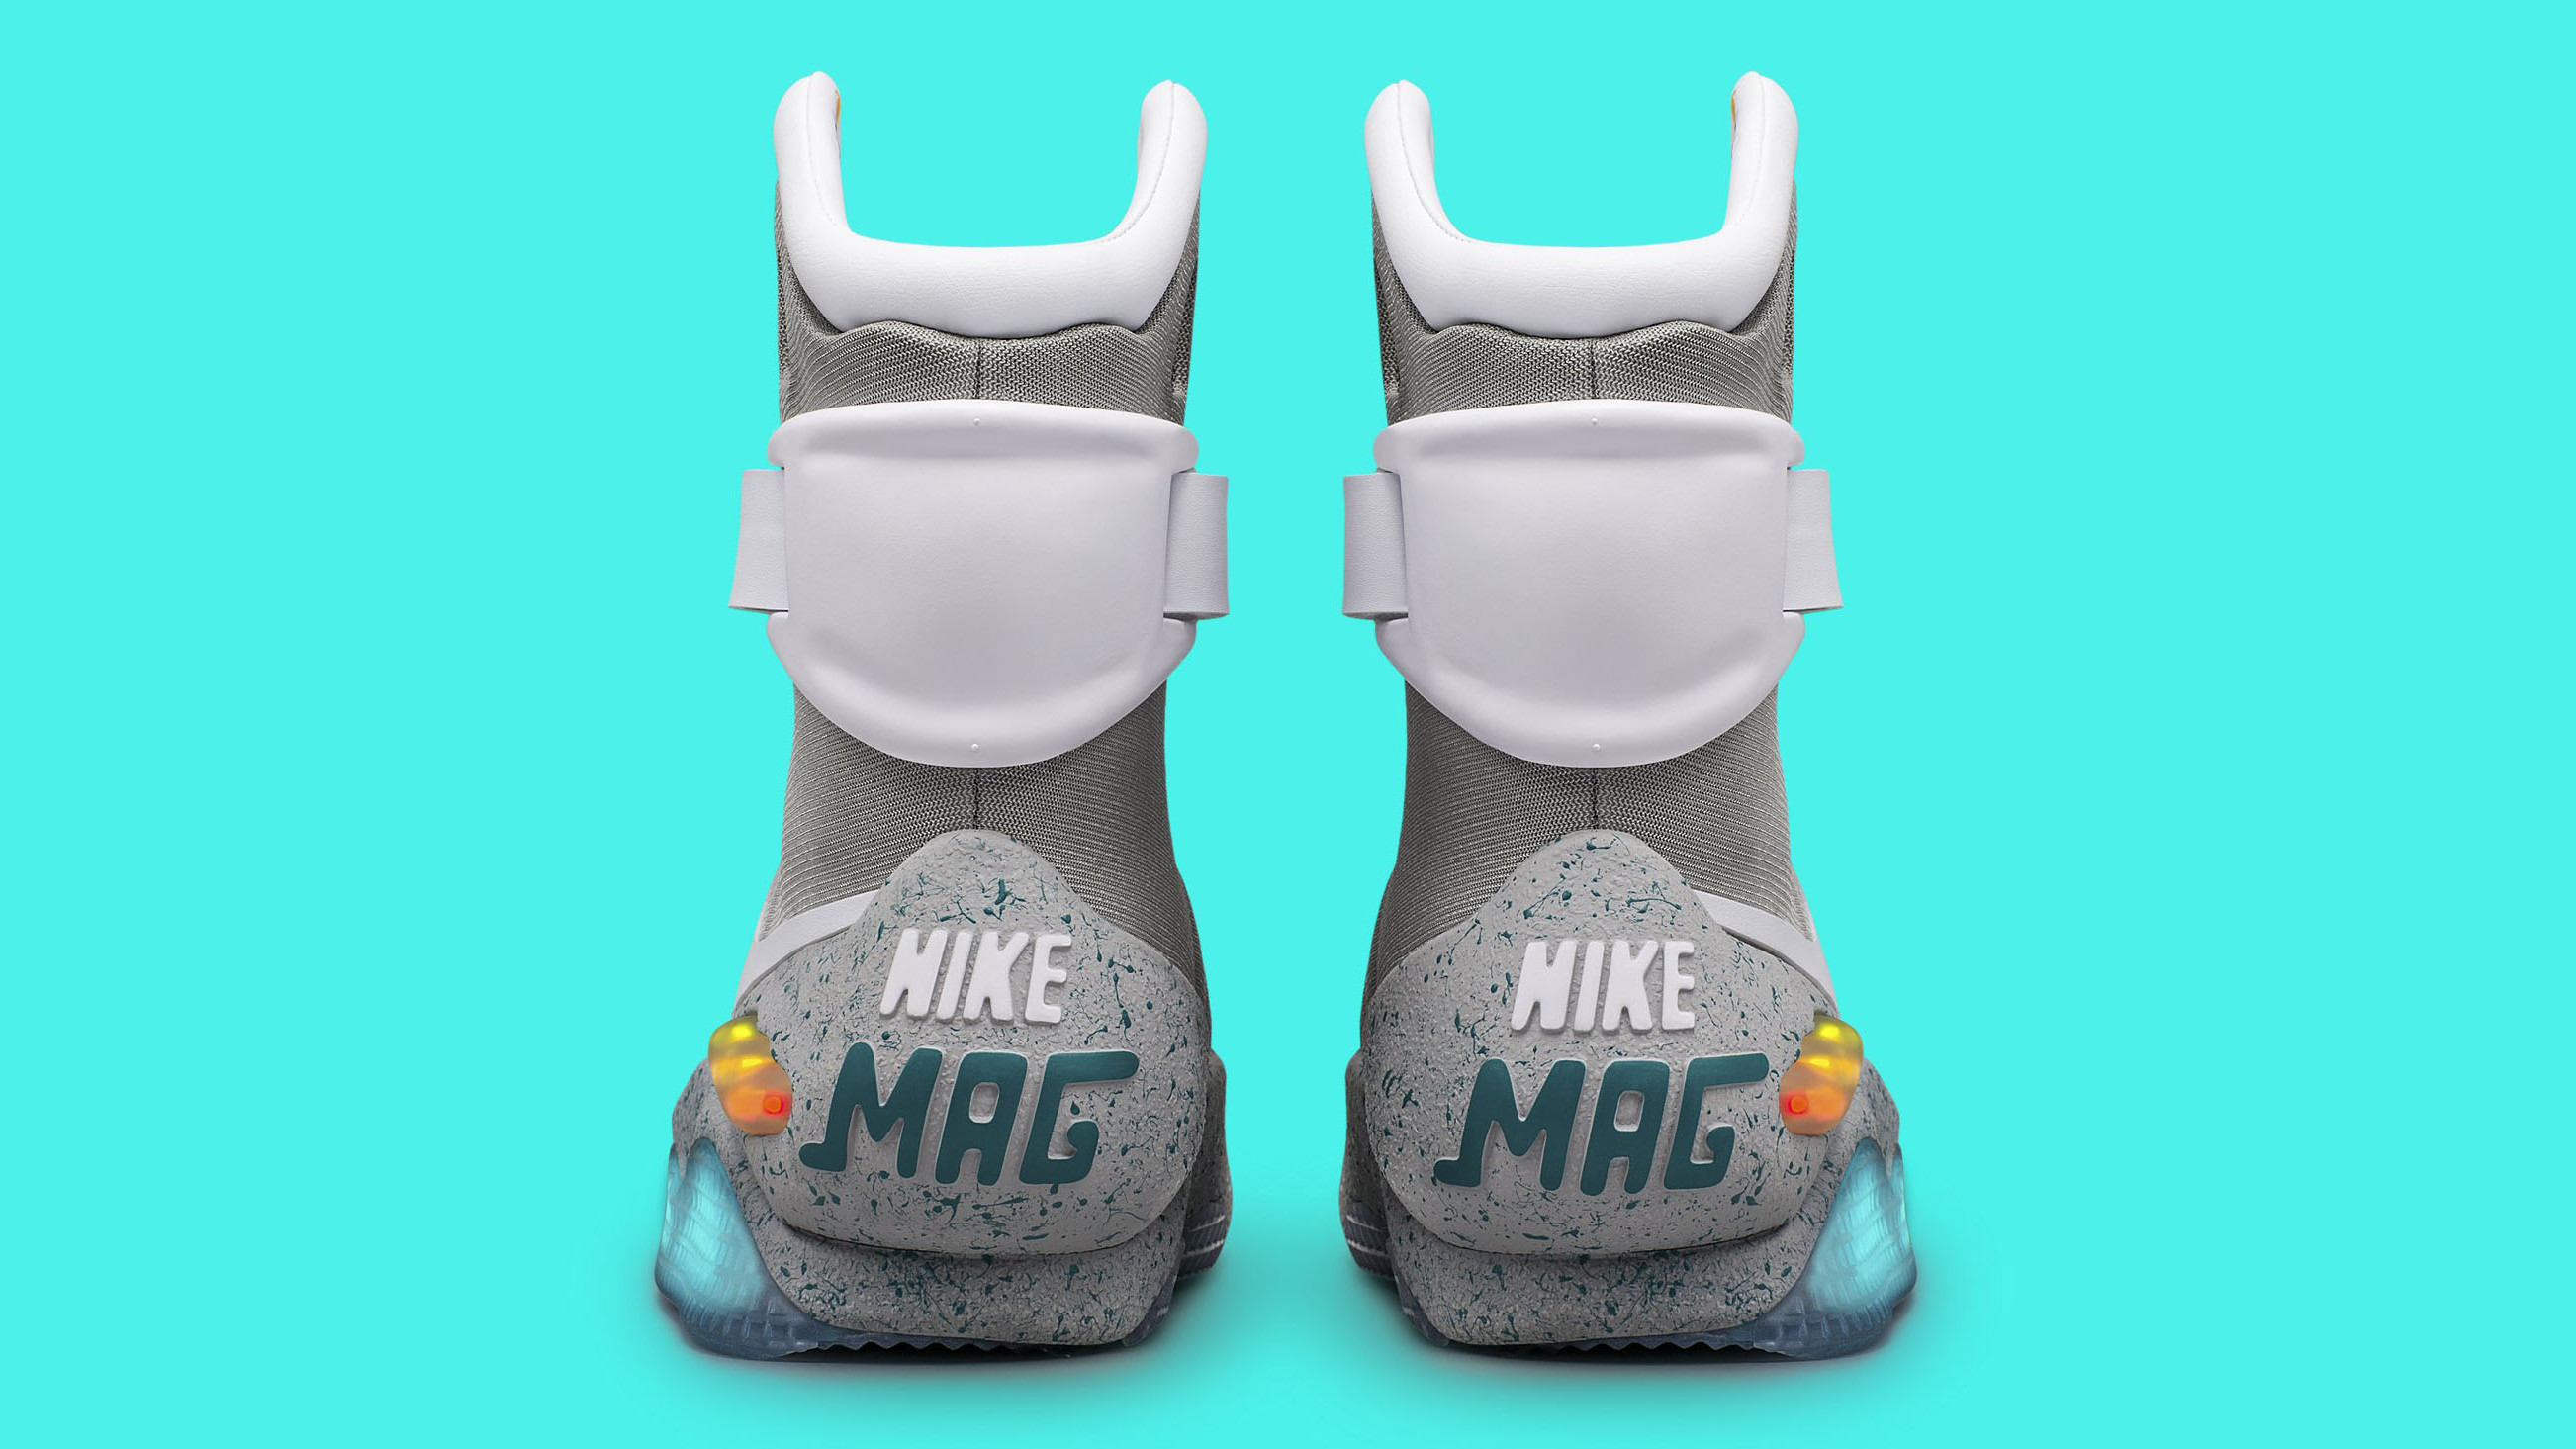 How Much Are Mag Back to the Future Sneakers | Sole Collector